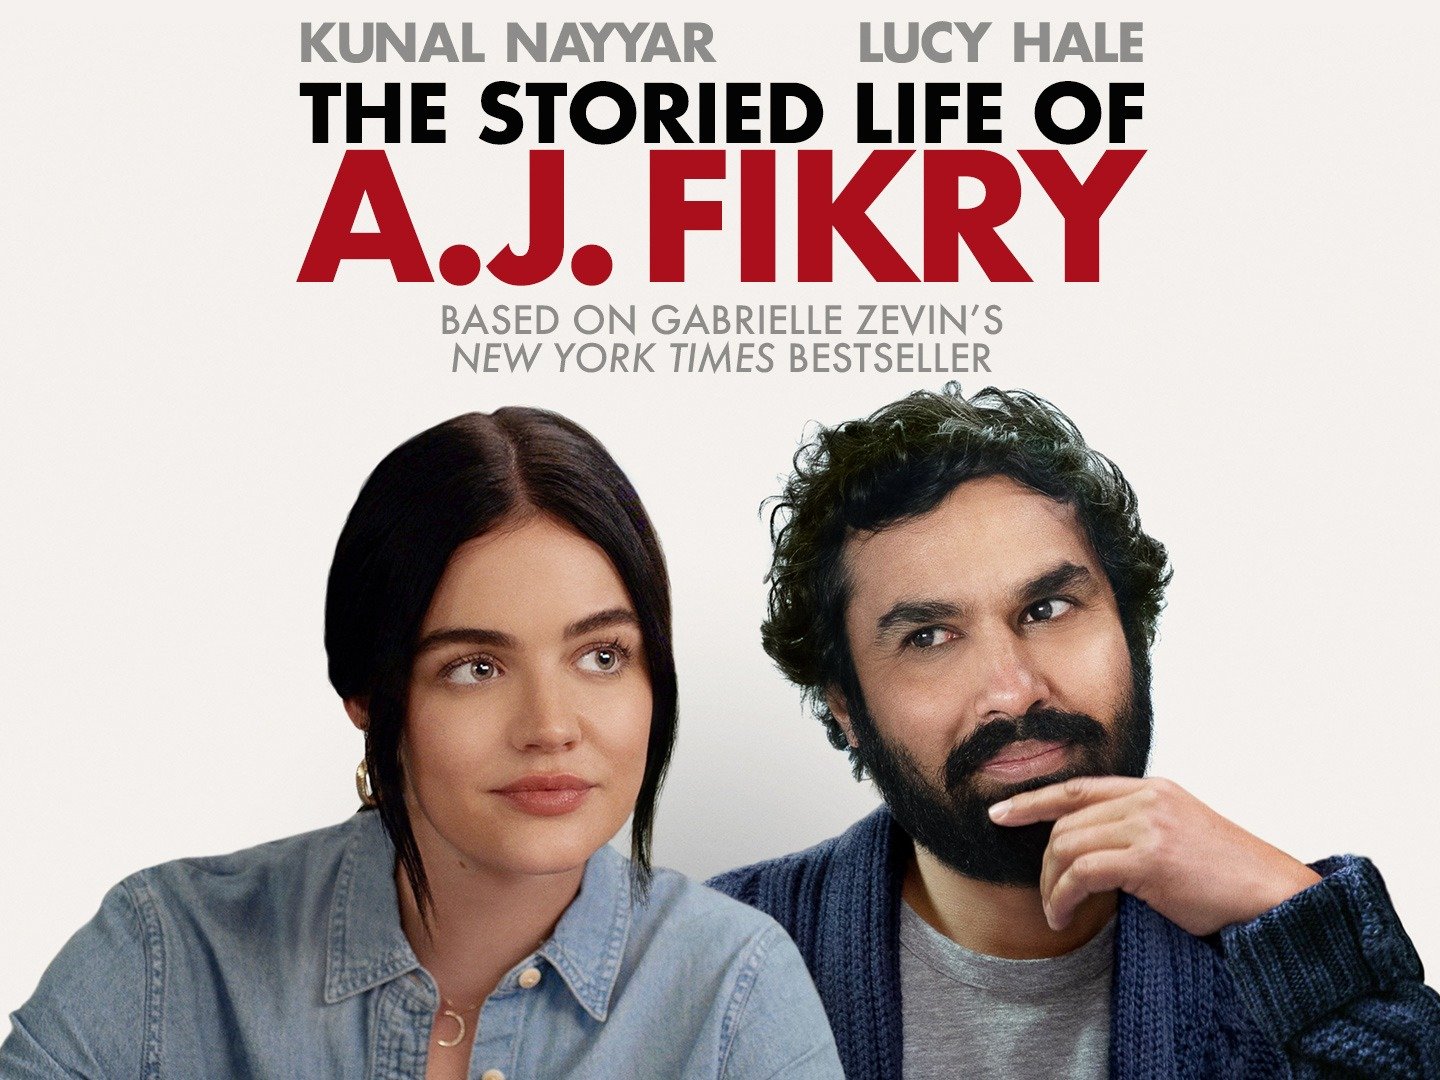 movie review the storied life of aj fikry